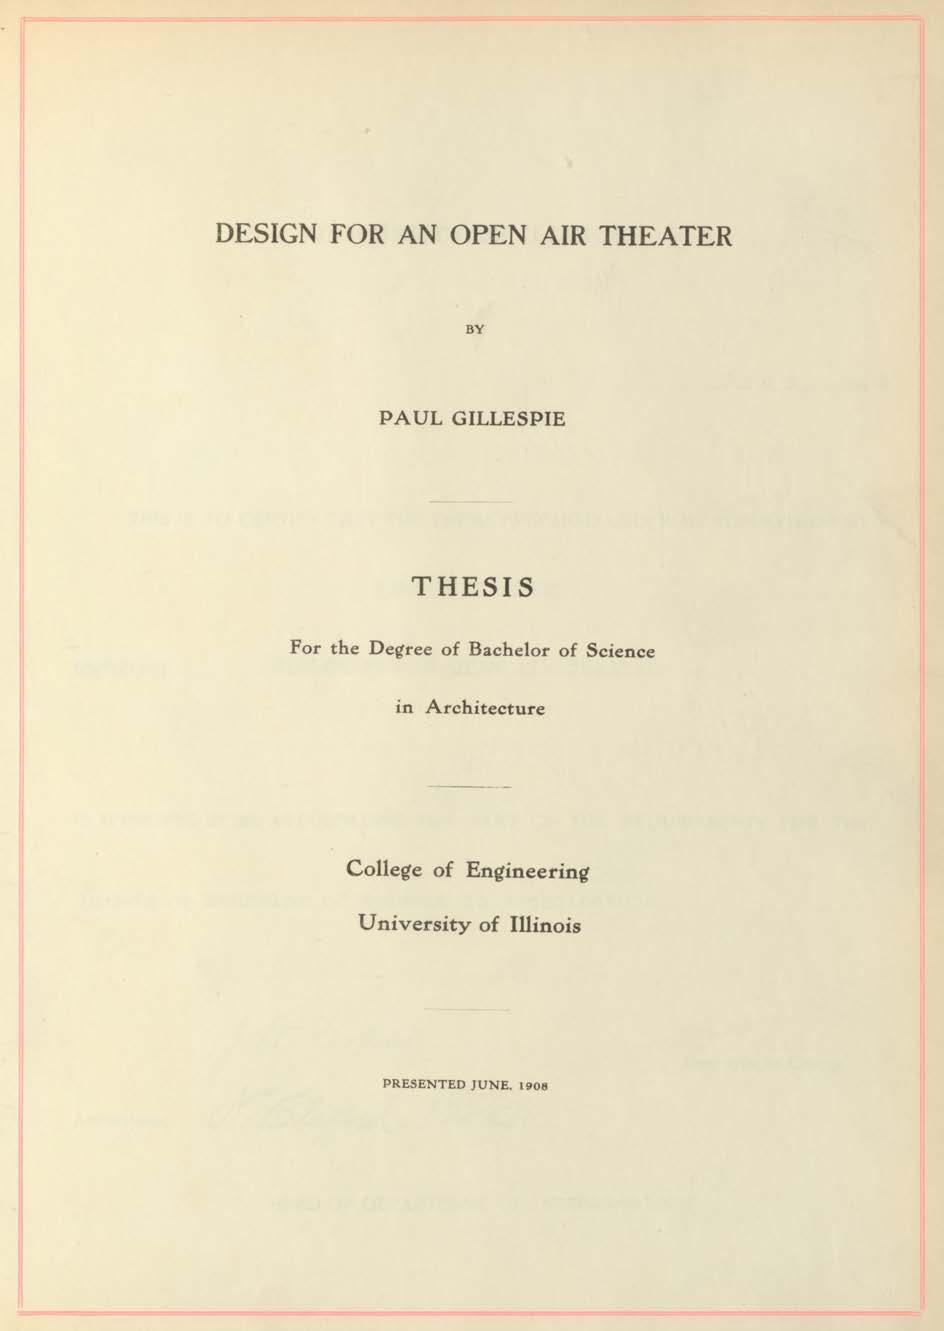 DESIGN FOR AN OPEN AIR THEATER BY P A U L G ILLESP IE THESIS For the Degree of Bachelor of